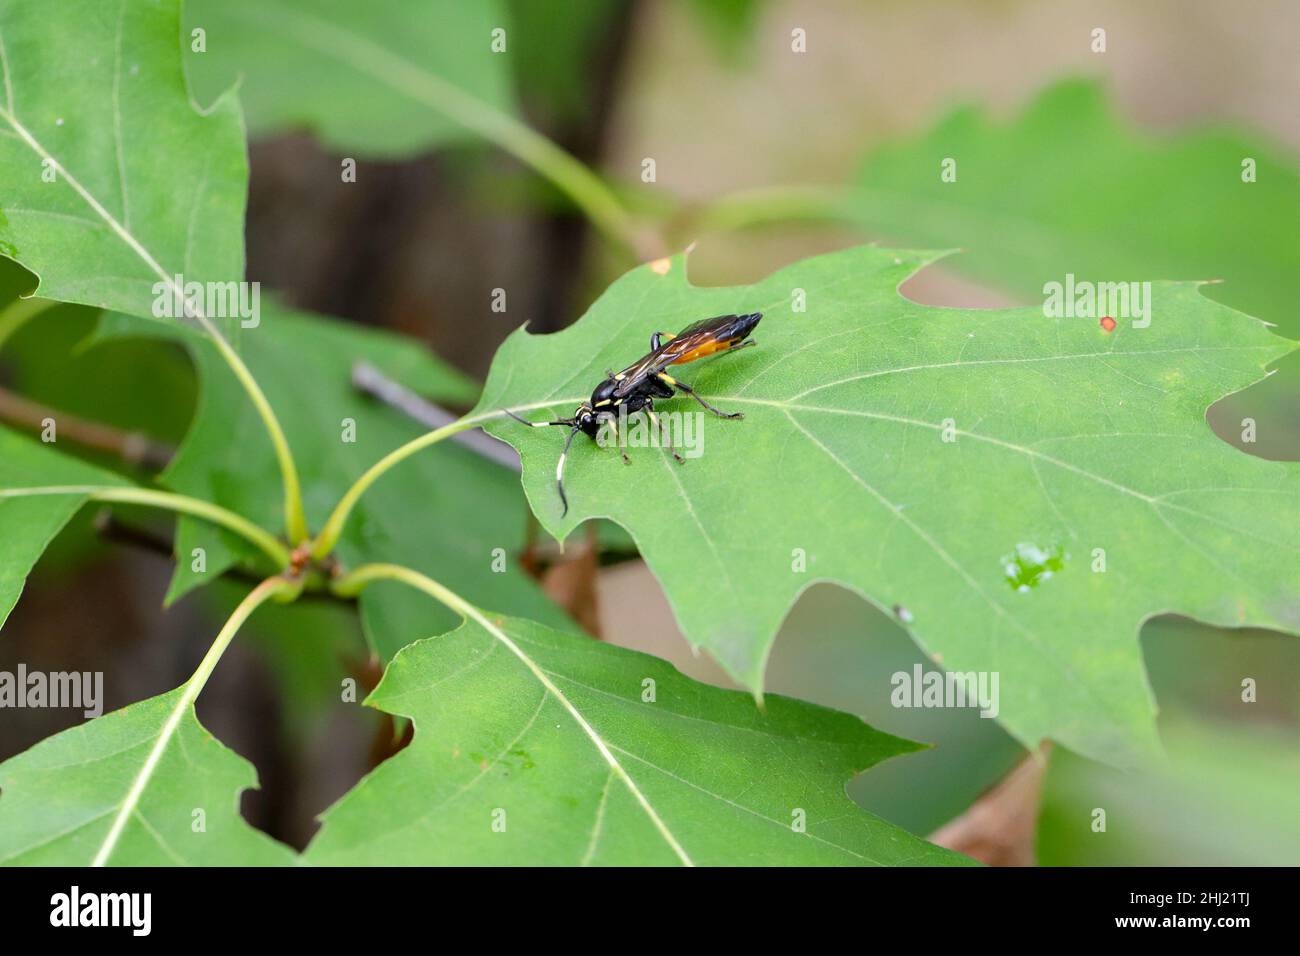 Hymenoptera of the family Ichneumonidae on a red oak leaf. These are known parasitoids of plant pests. Stock Photo